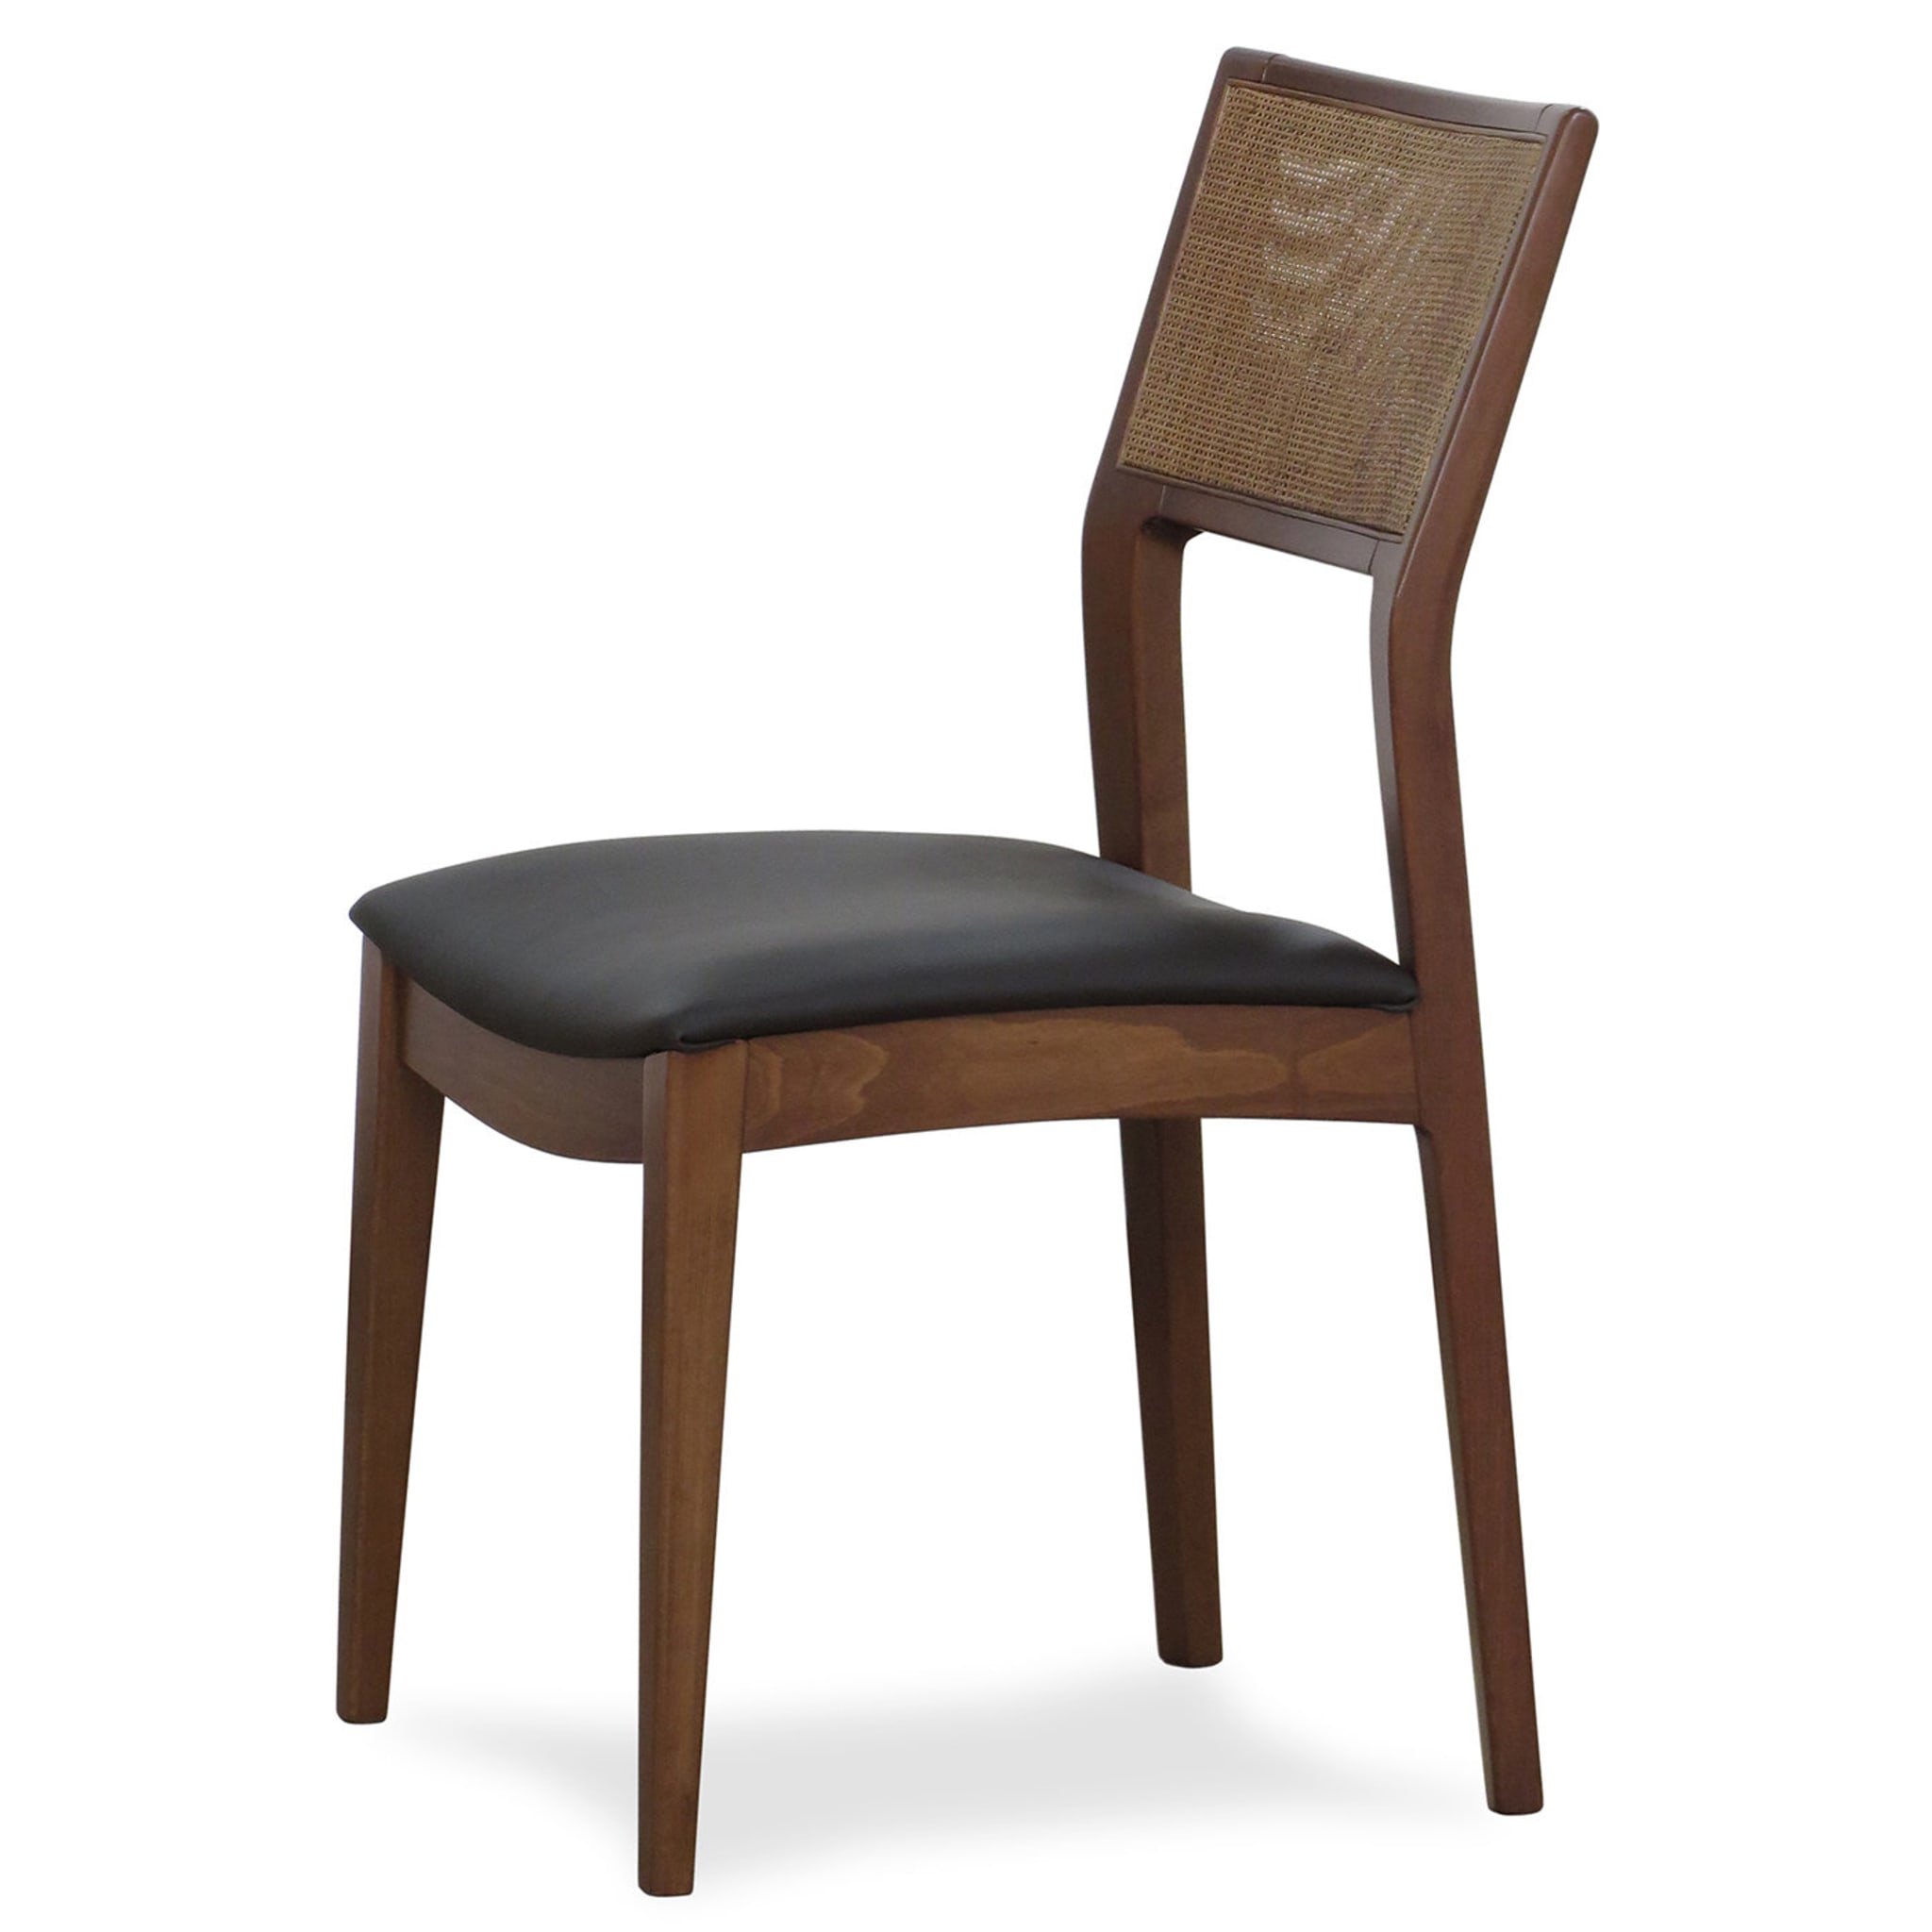 DOM-6 Set of 2 Chairs - Alternative view 2